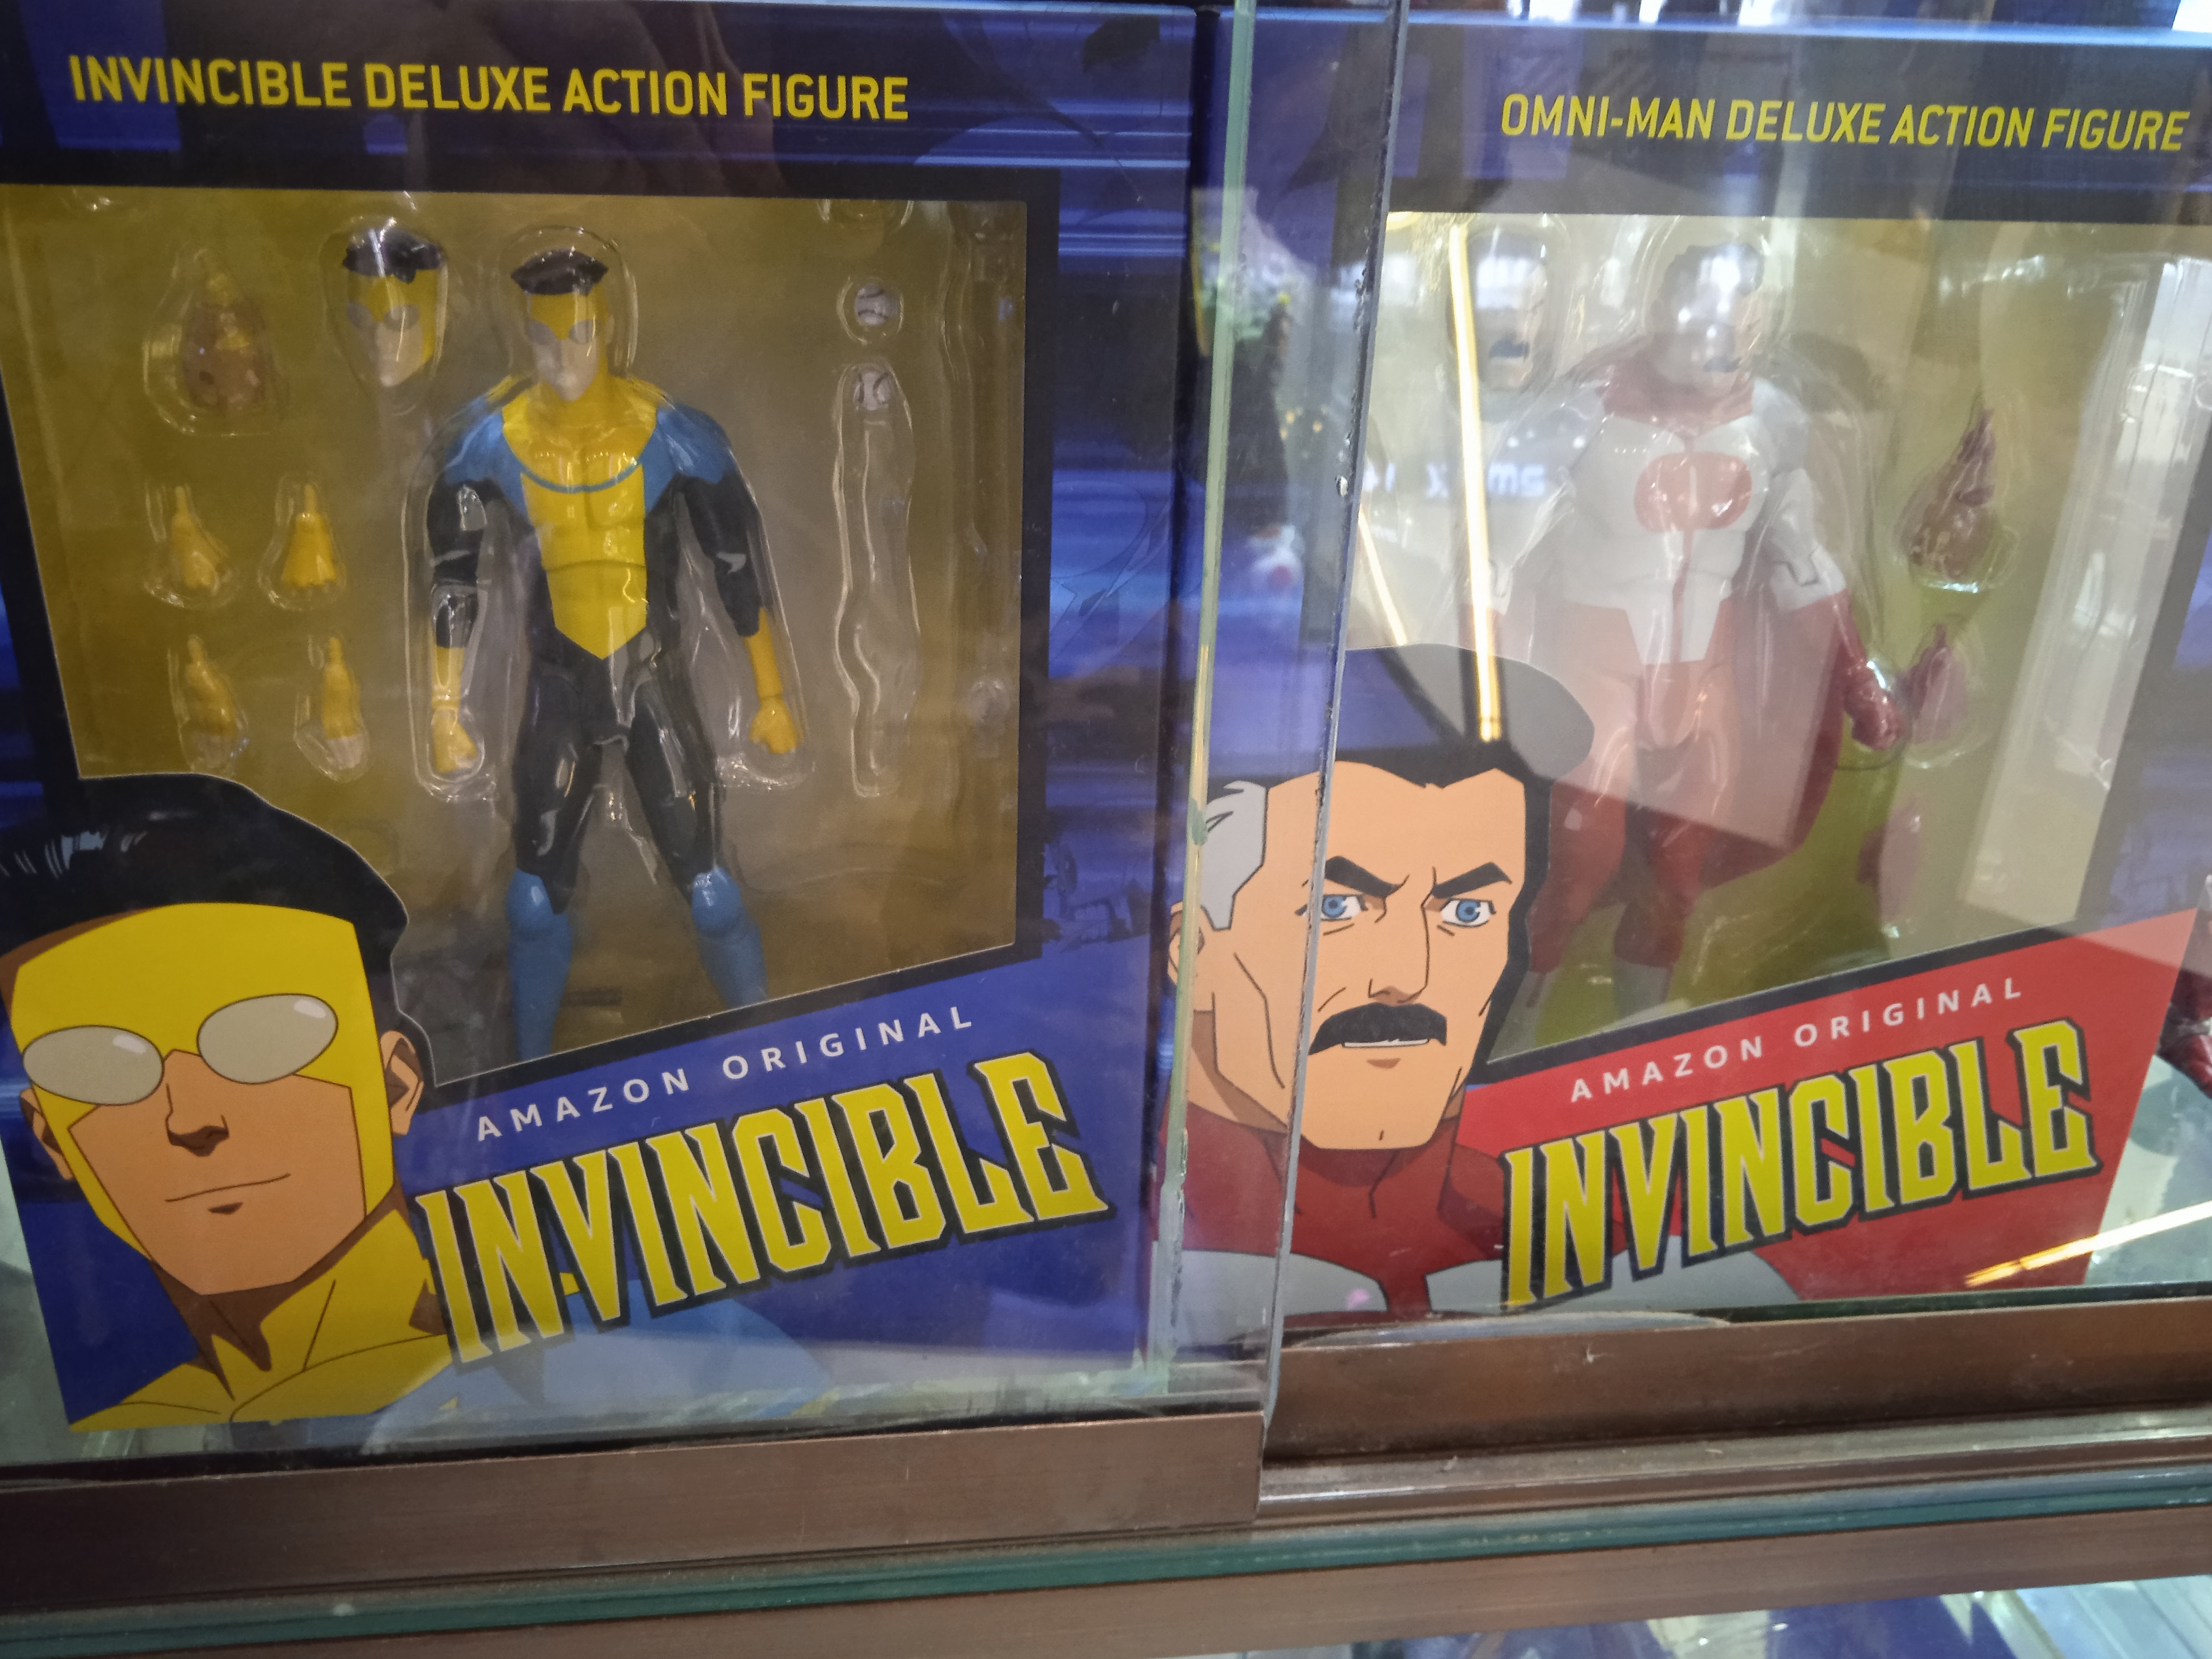 Invincible and Omni-Man action figures by thereanimatedunknown on DeviantArt